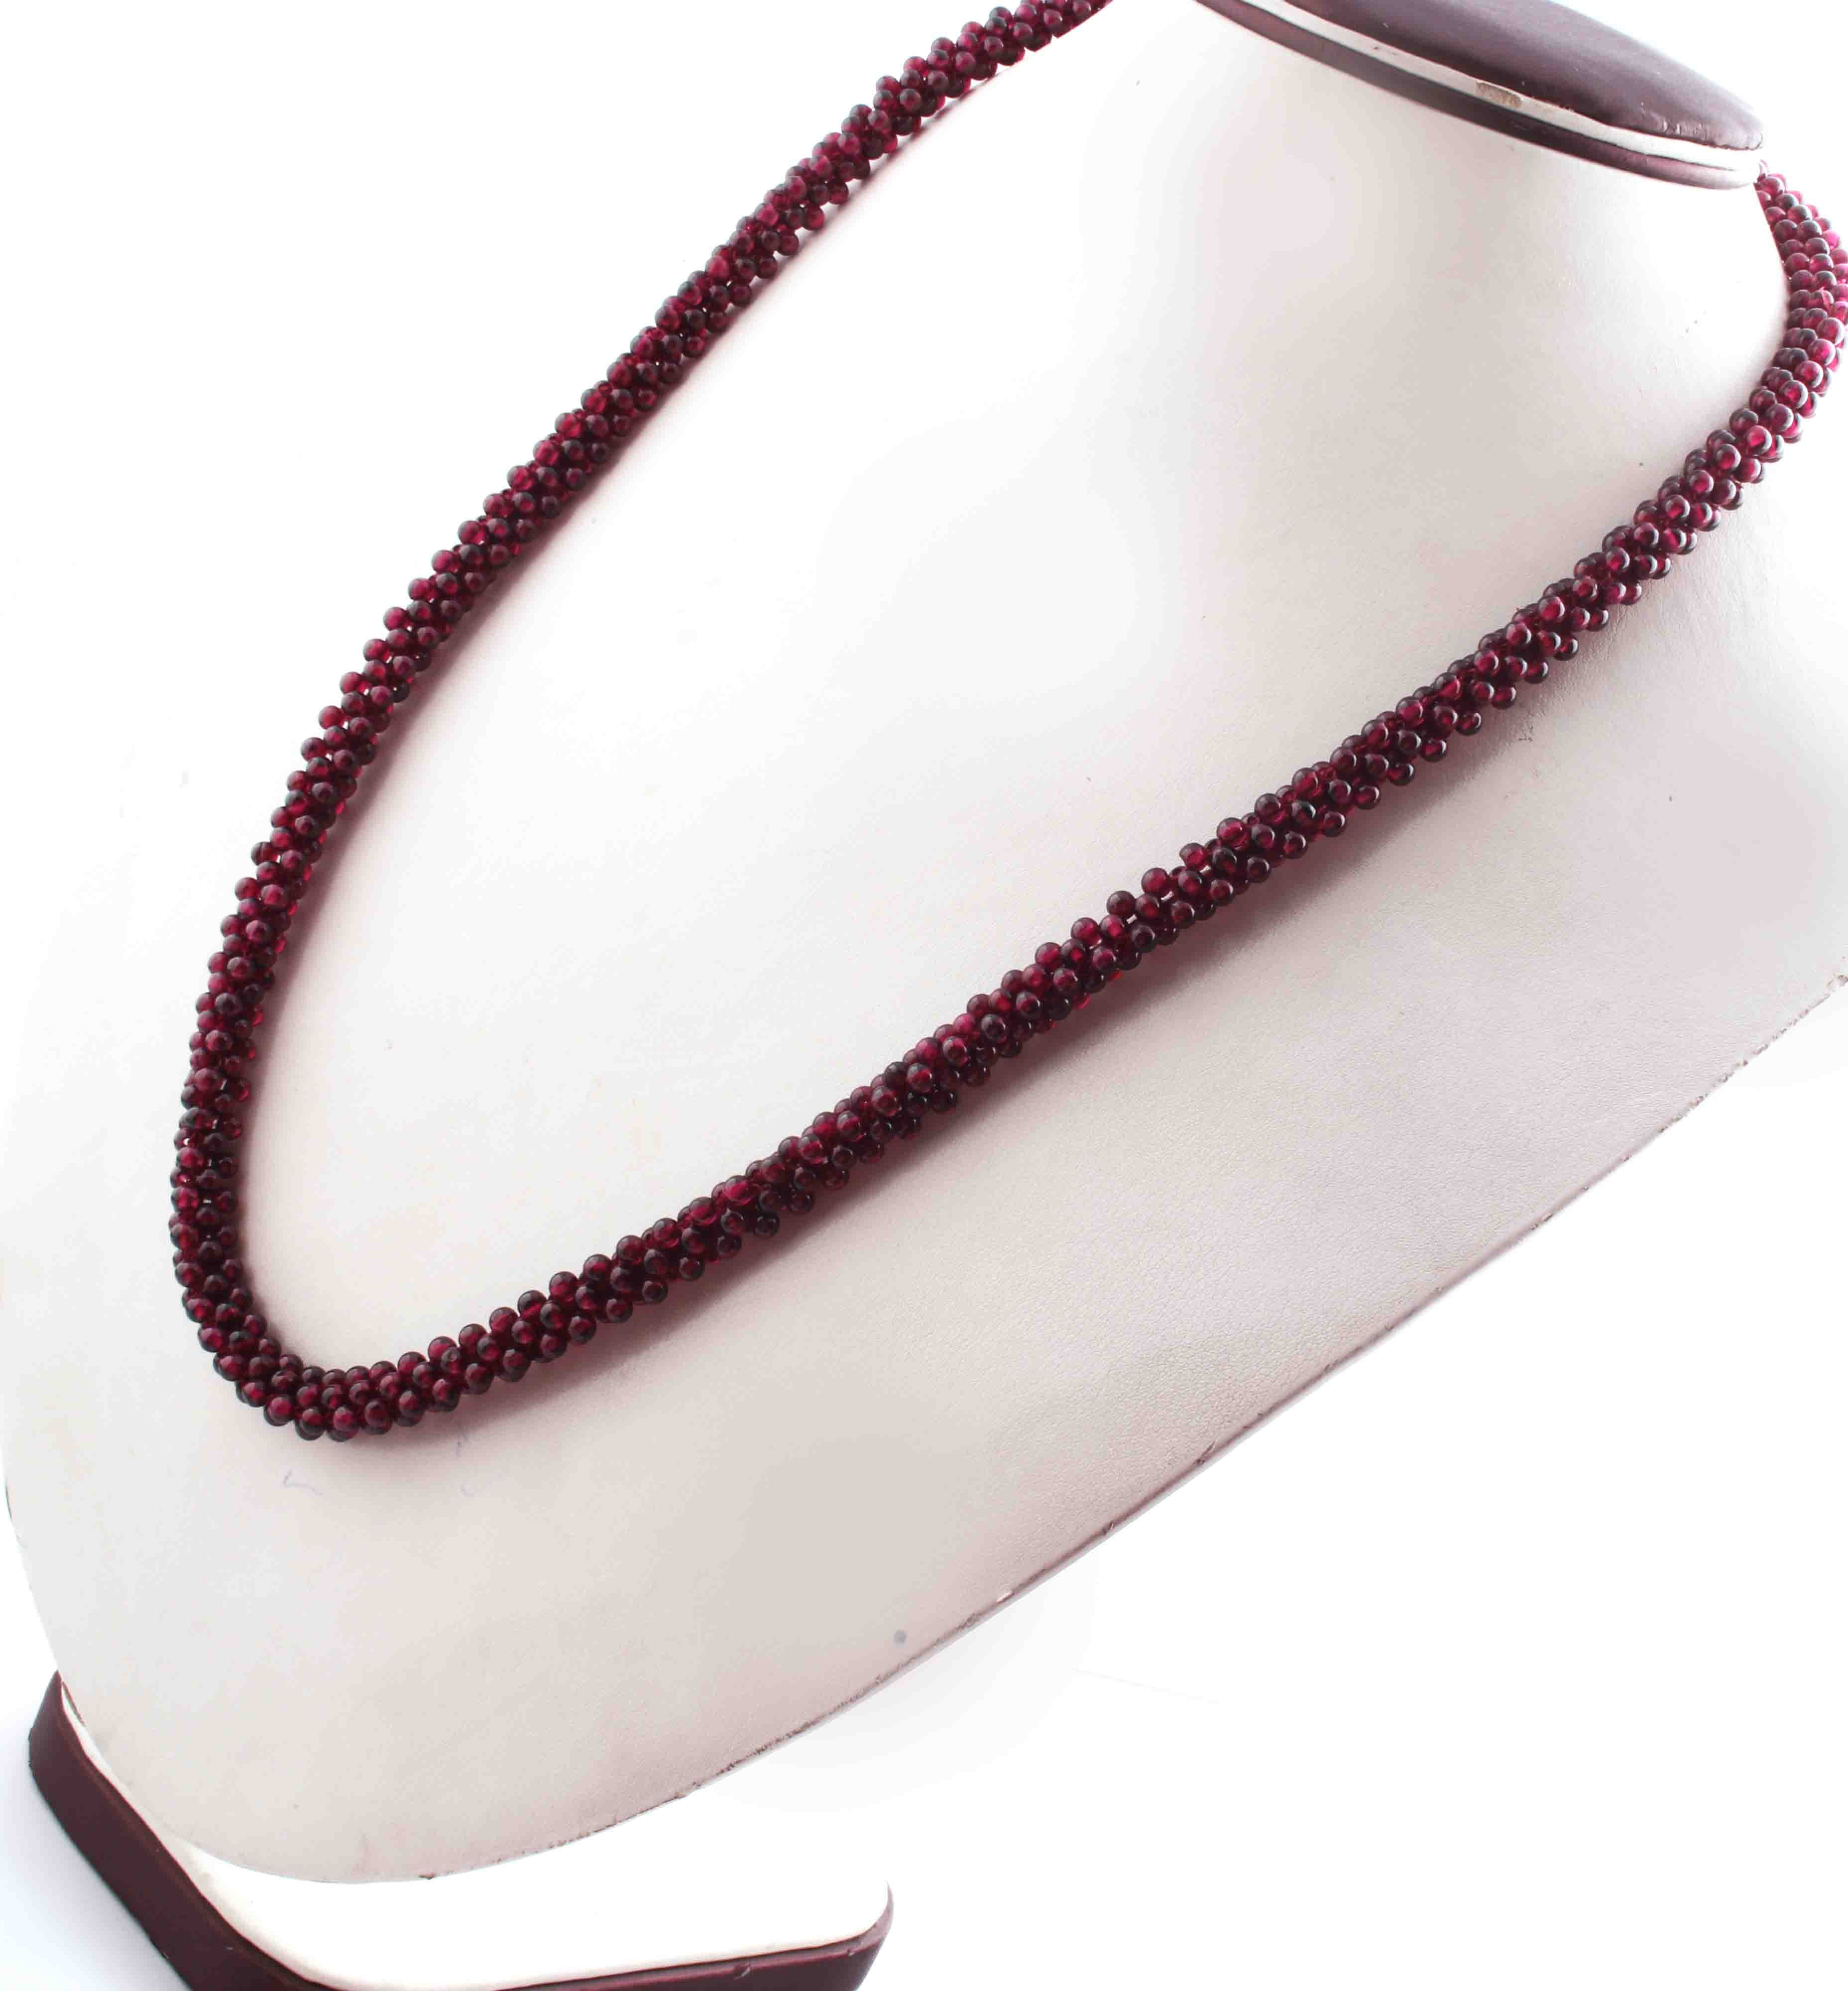 Maroon Beads Multi Colored String Necklace at best price in New